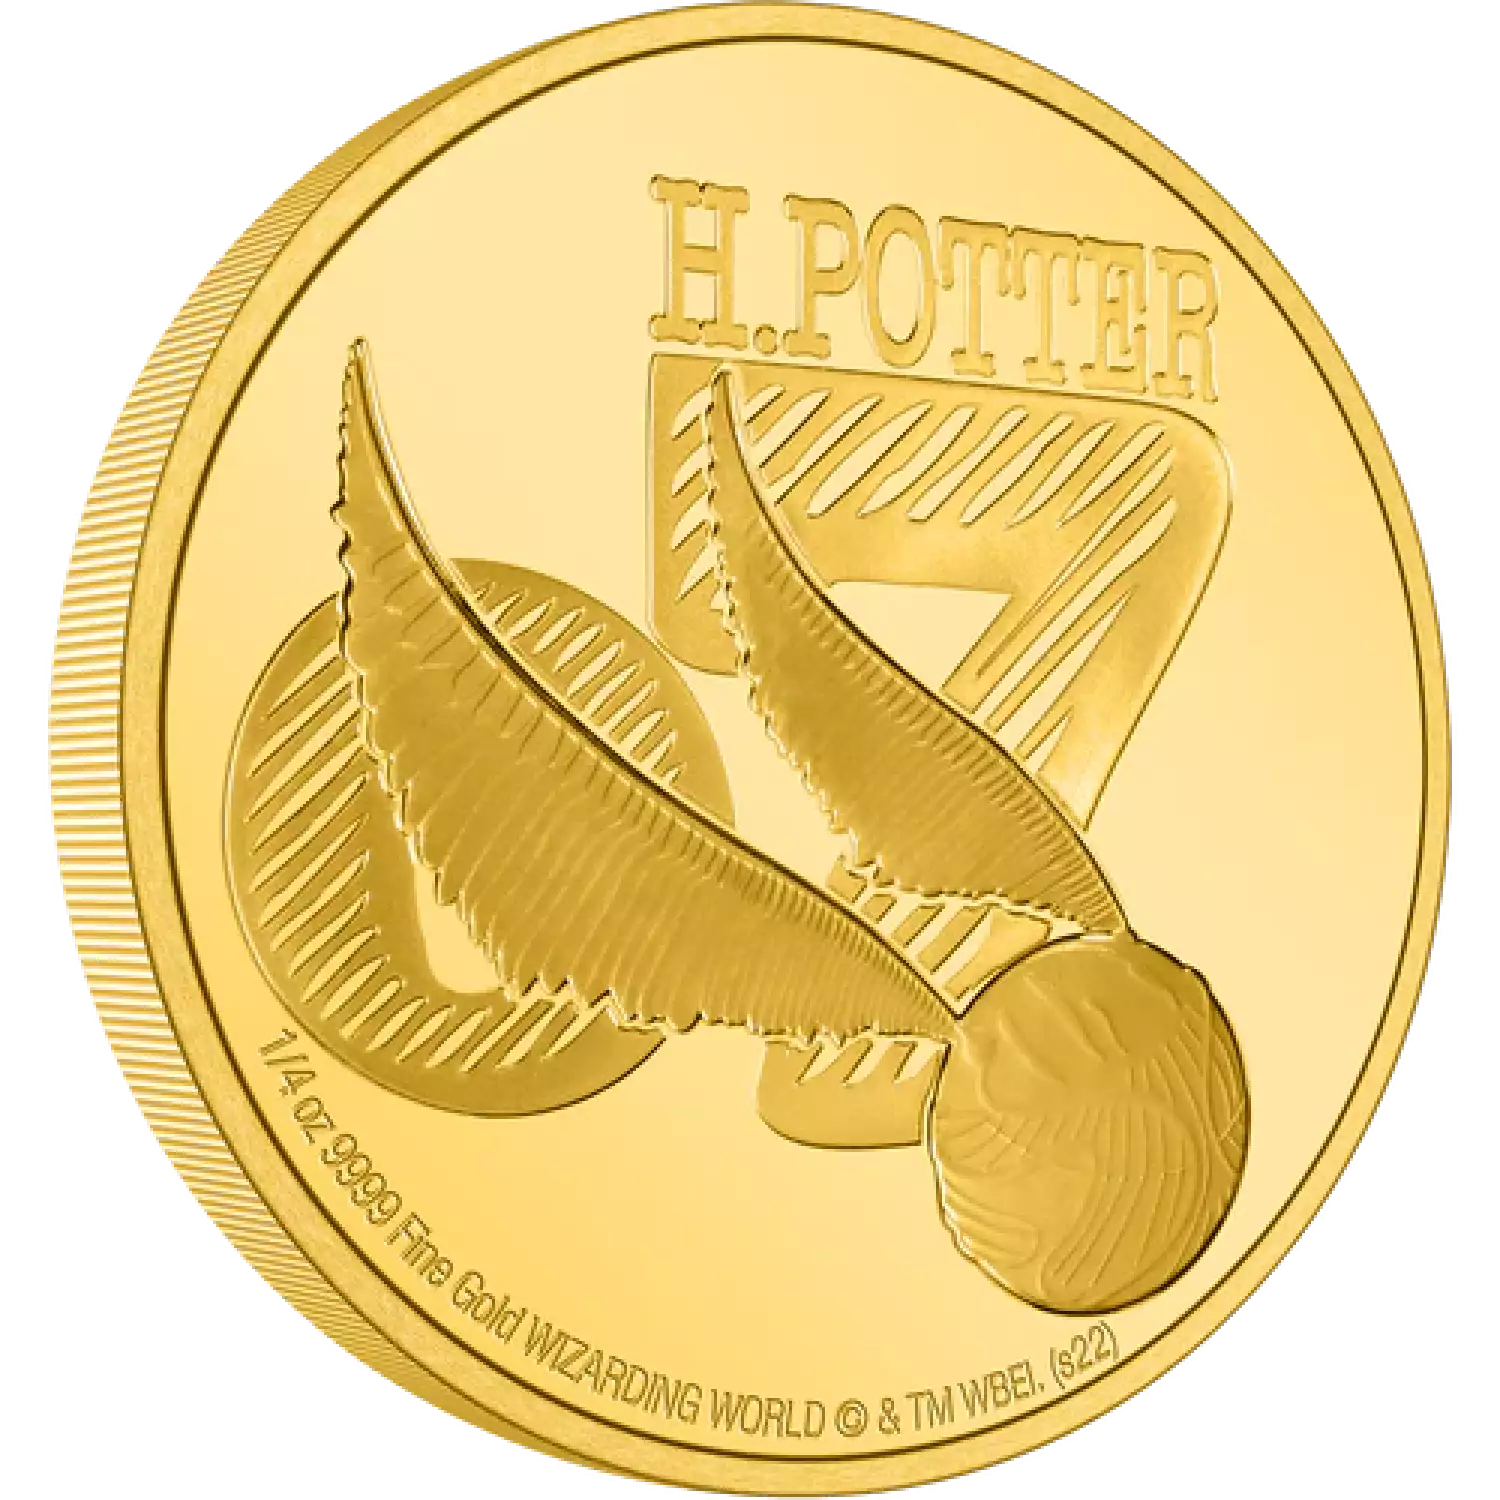 HARRY POTTER - 1/4oz Classic Golden Snitch Gold Coin (3)